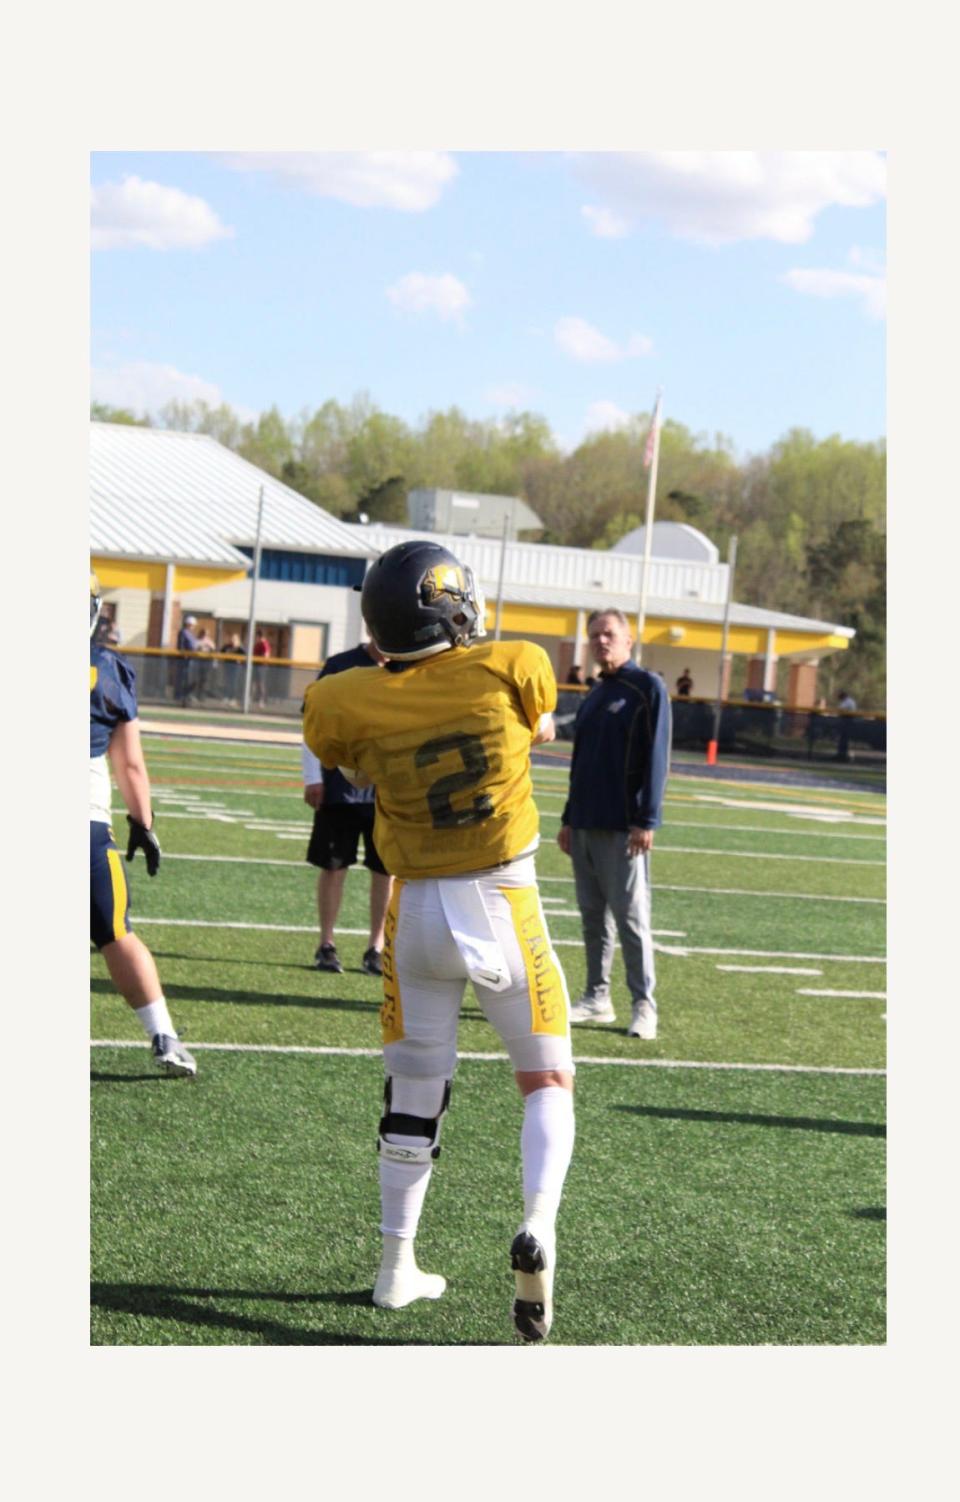 Former South Effingham High School standout quarterback Taylor Jackson throws during spring practice at Reinhardt University in Waleska. Jackson later suffered a torn ACL and will miss the 2022 season.